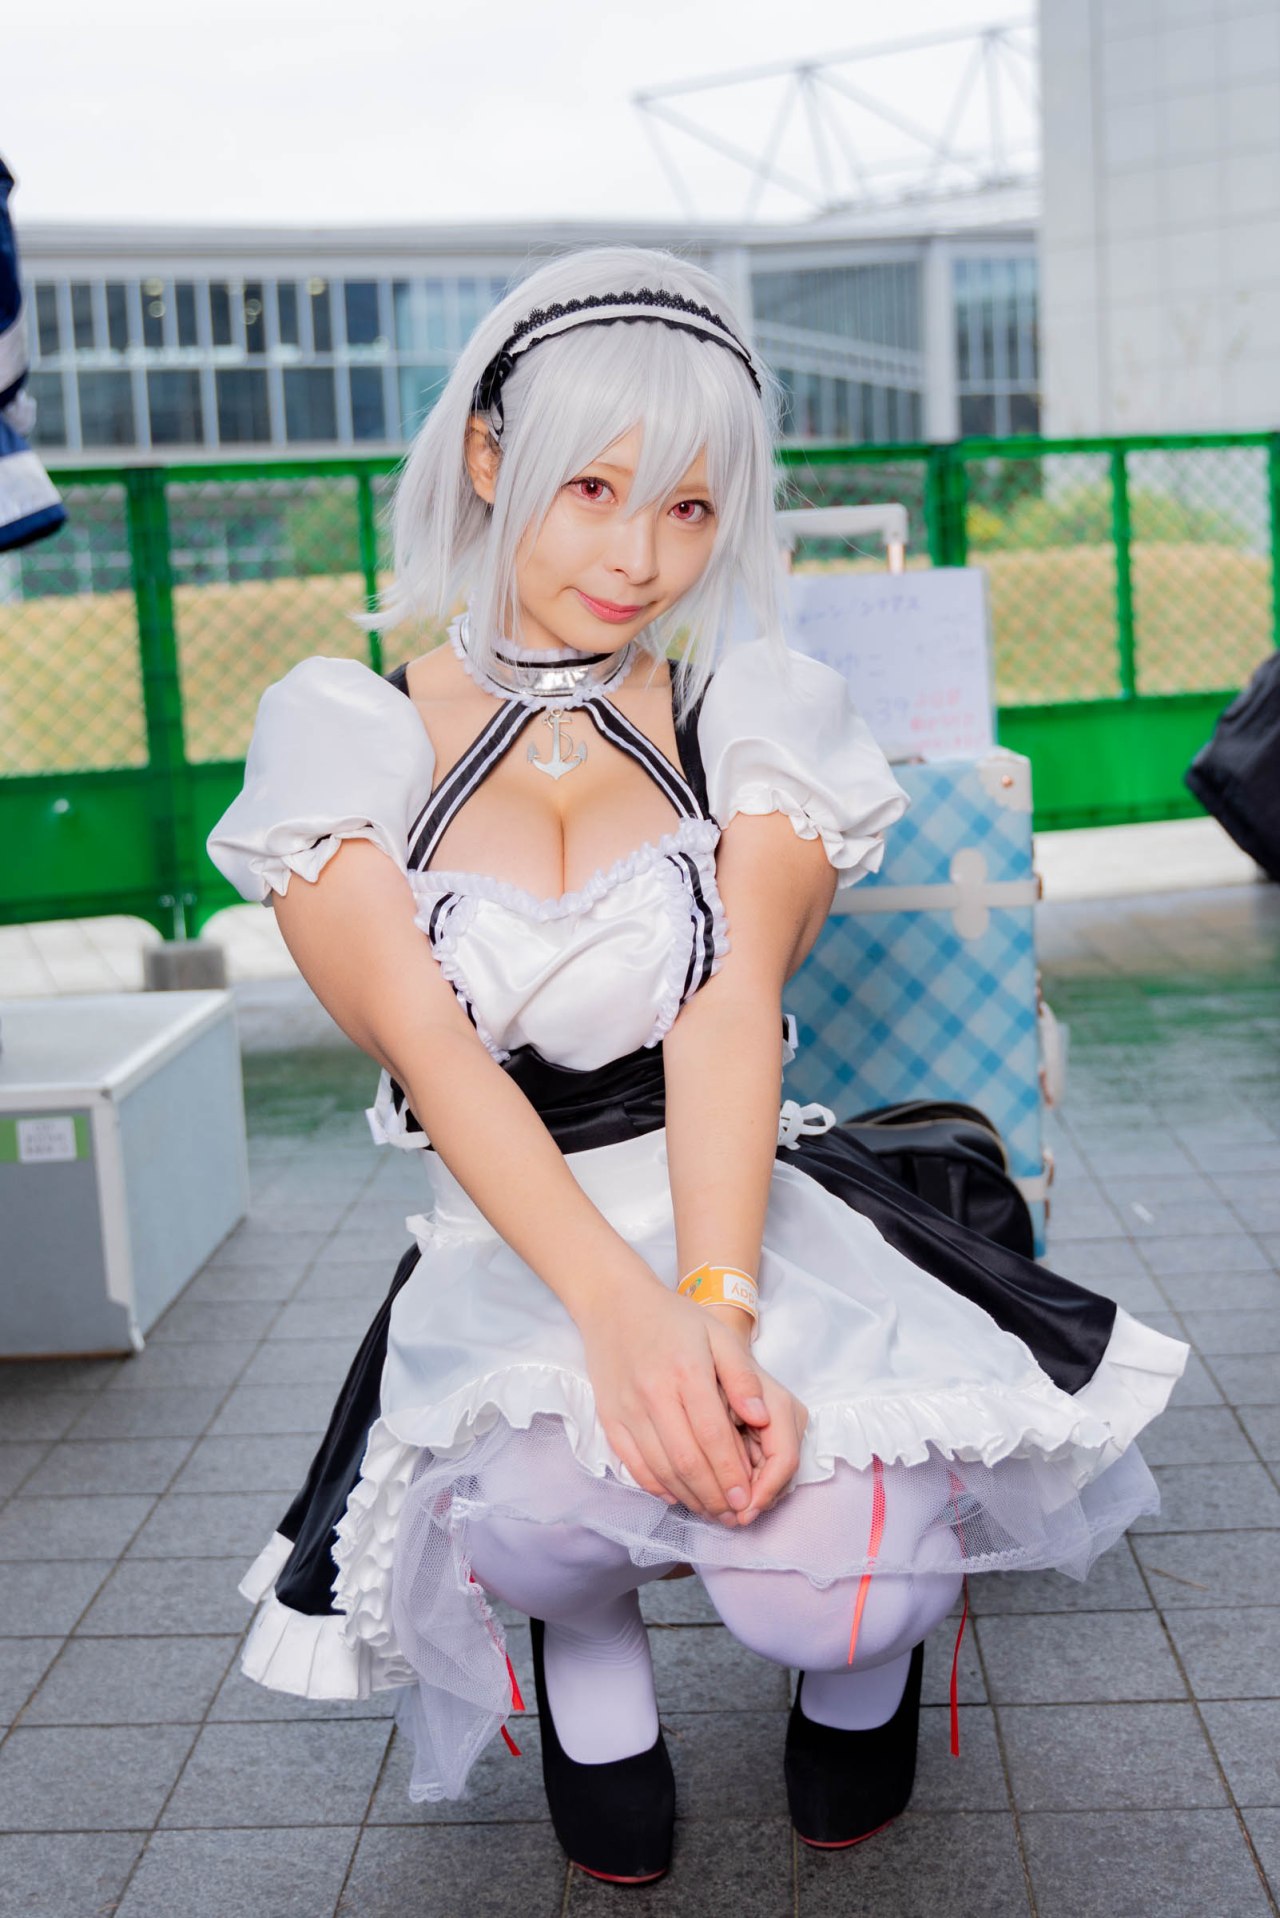 Portrait of Japan Anime Cosplay Woman , White Japanese Maid in White Tone  Room Stock Image - Image of costume, comic: 149599311